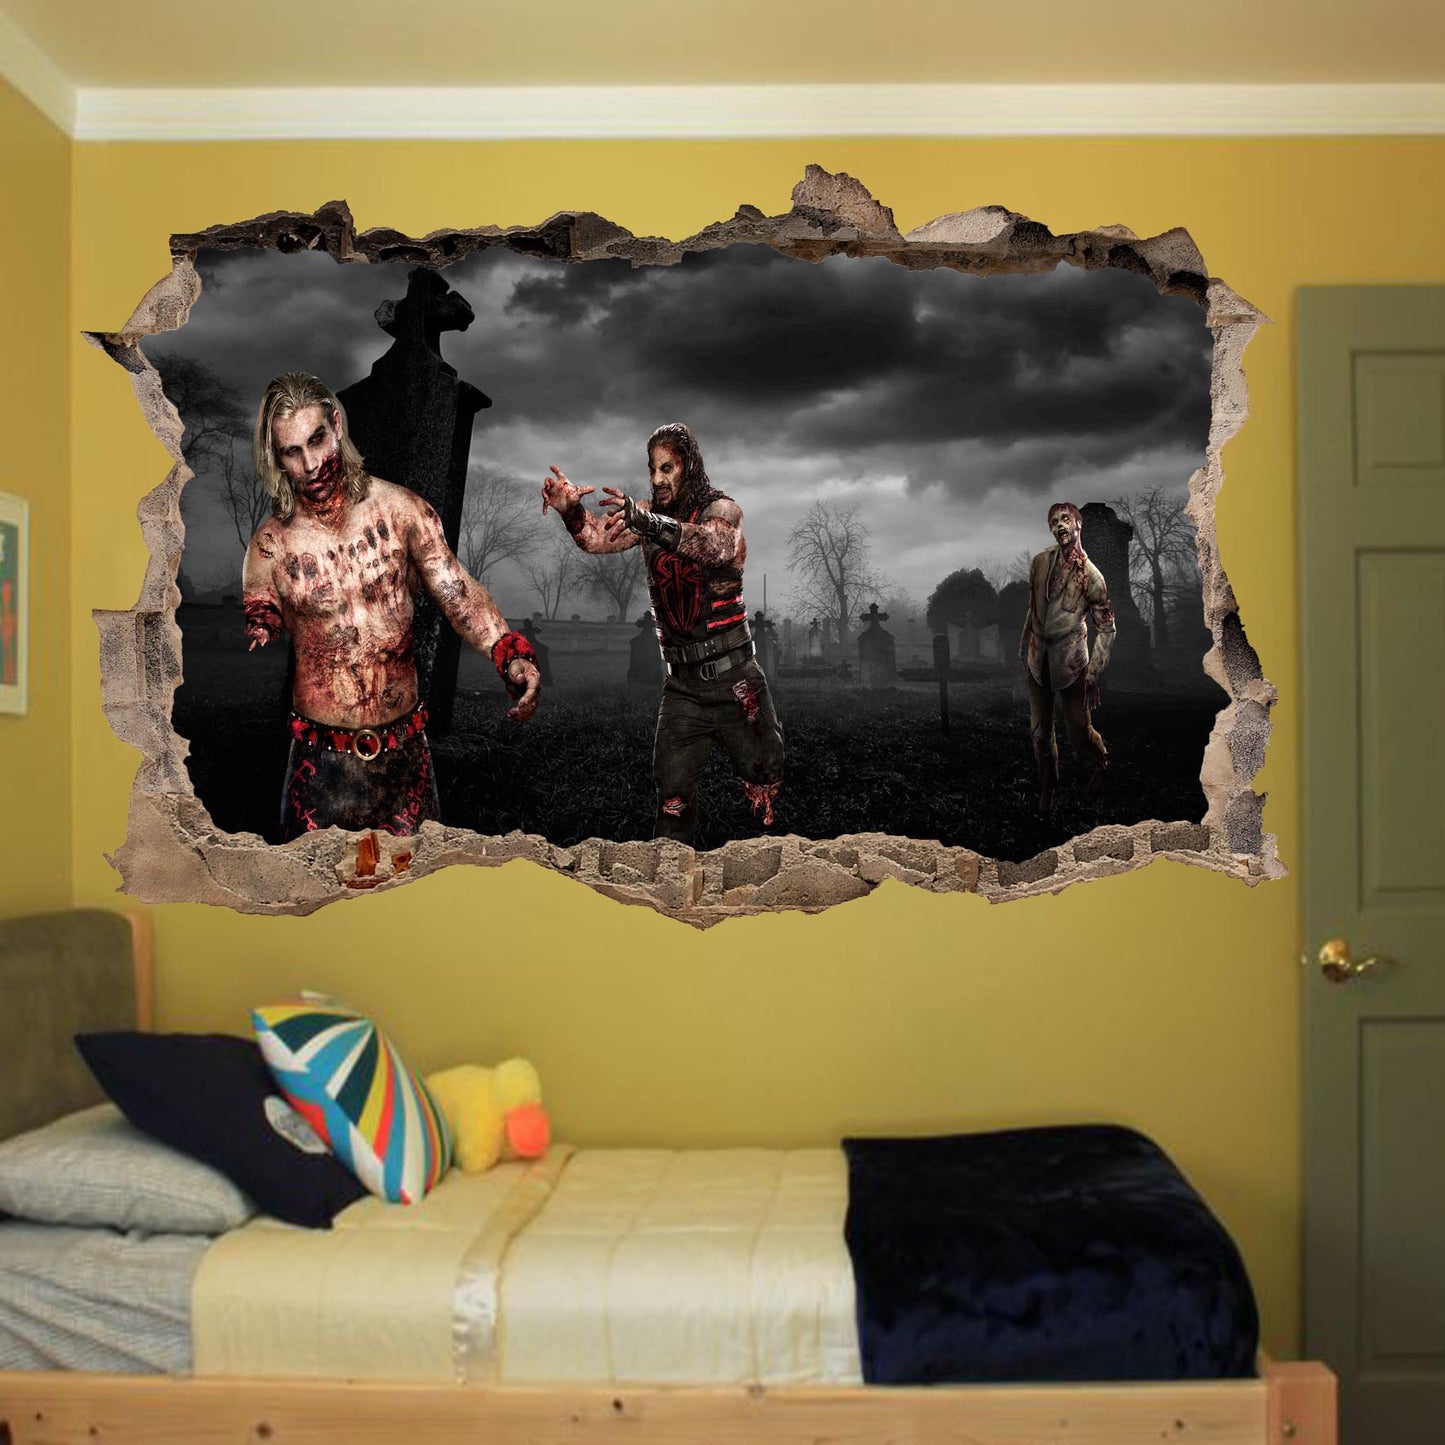 zombi apocalypse wall sticker decal mural poster